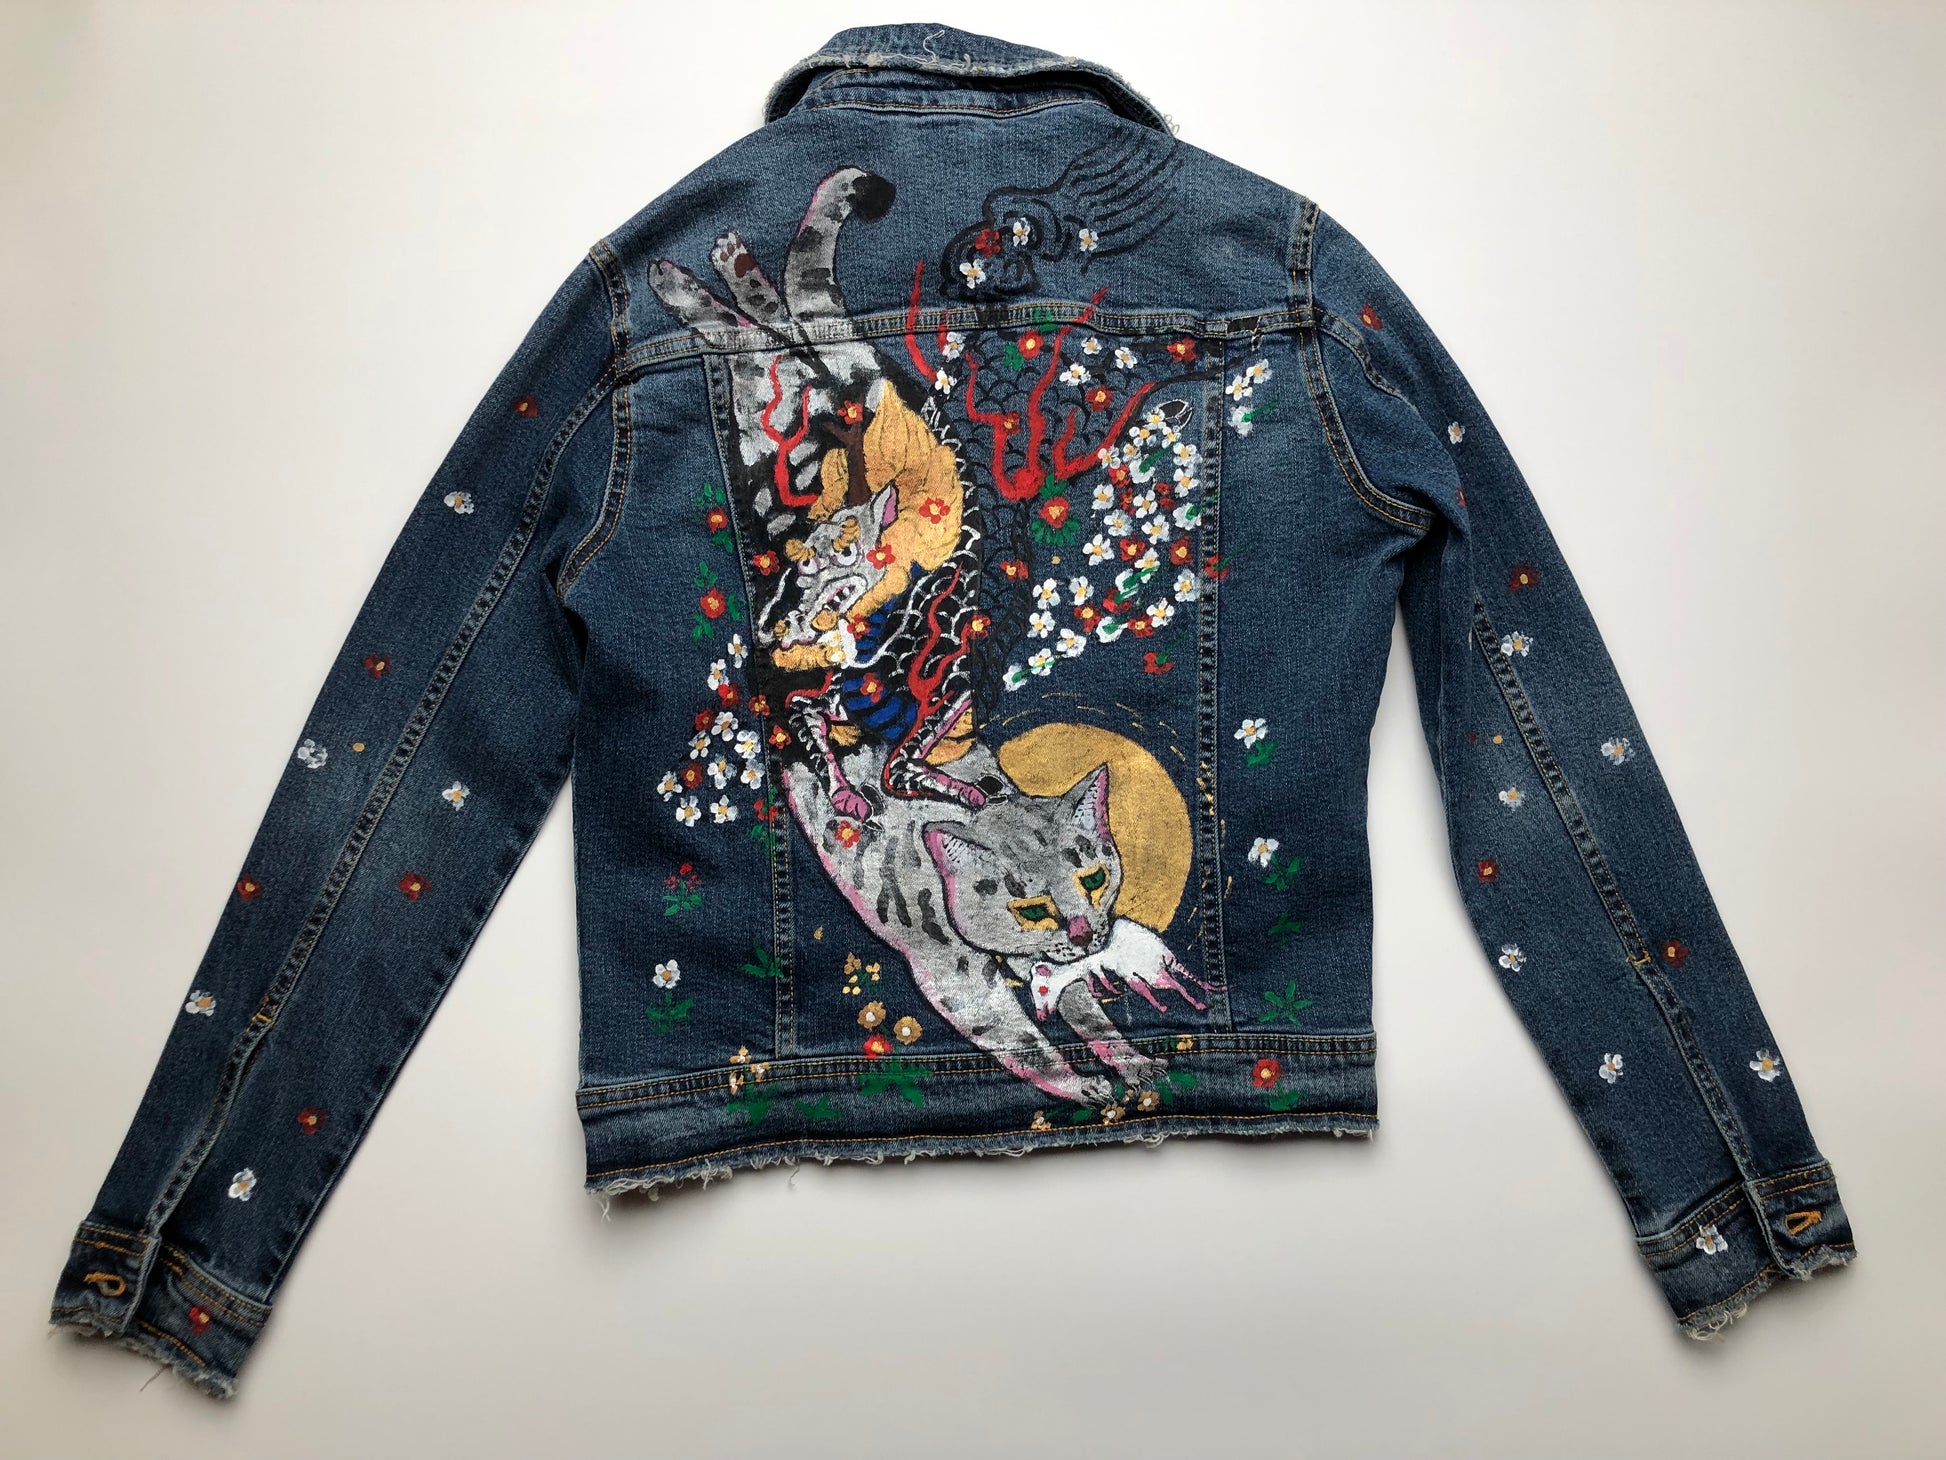 A cat with a mouse and a demon on a women's handmade denim jacket reverse side